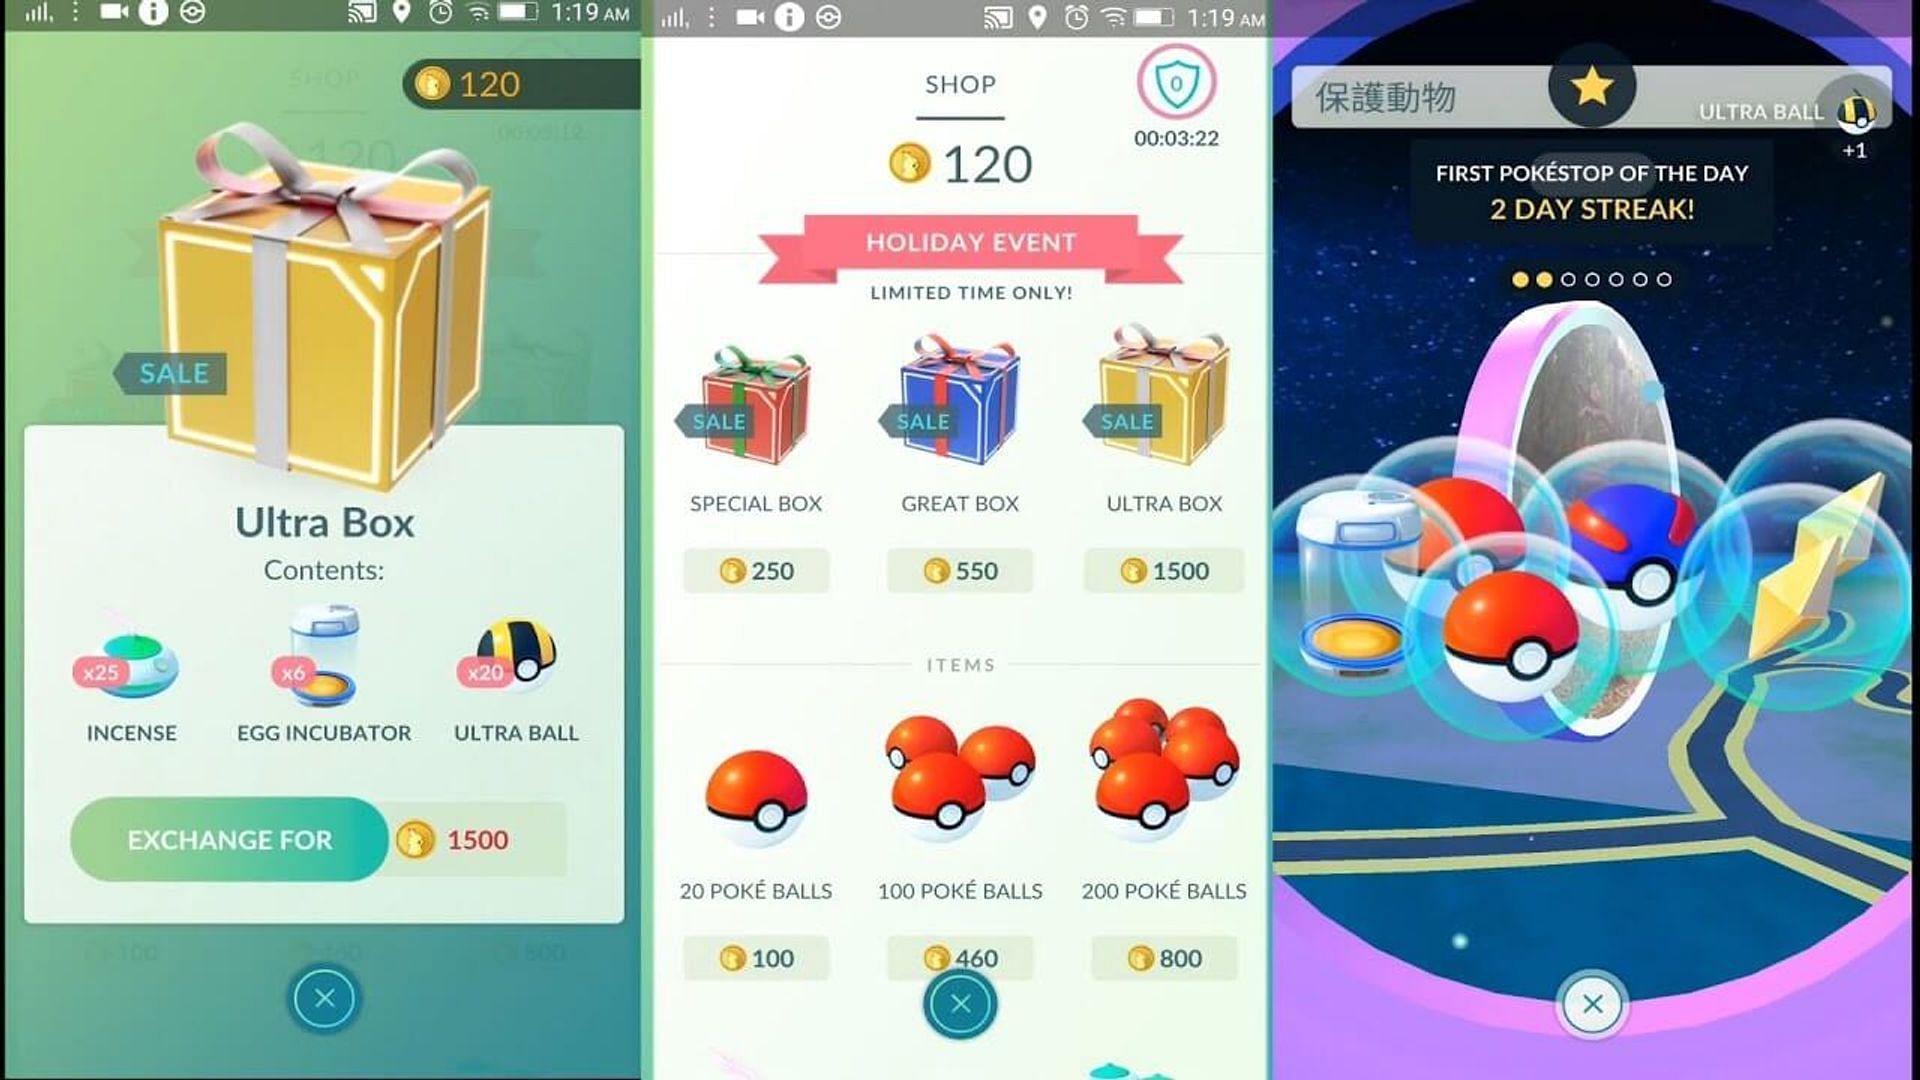 The Pokemon Store as it appears in-game (Image via Niantic)